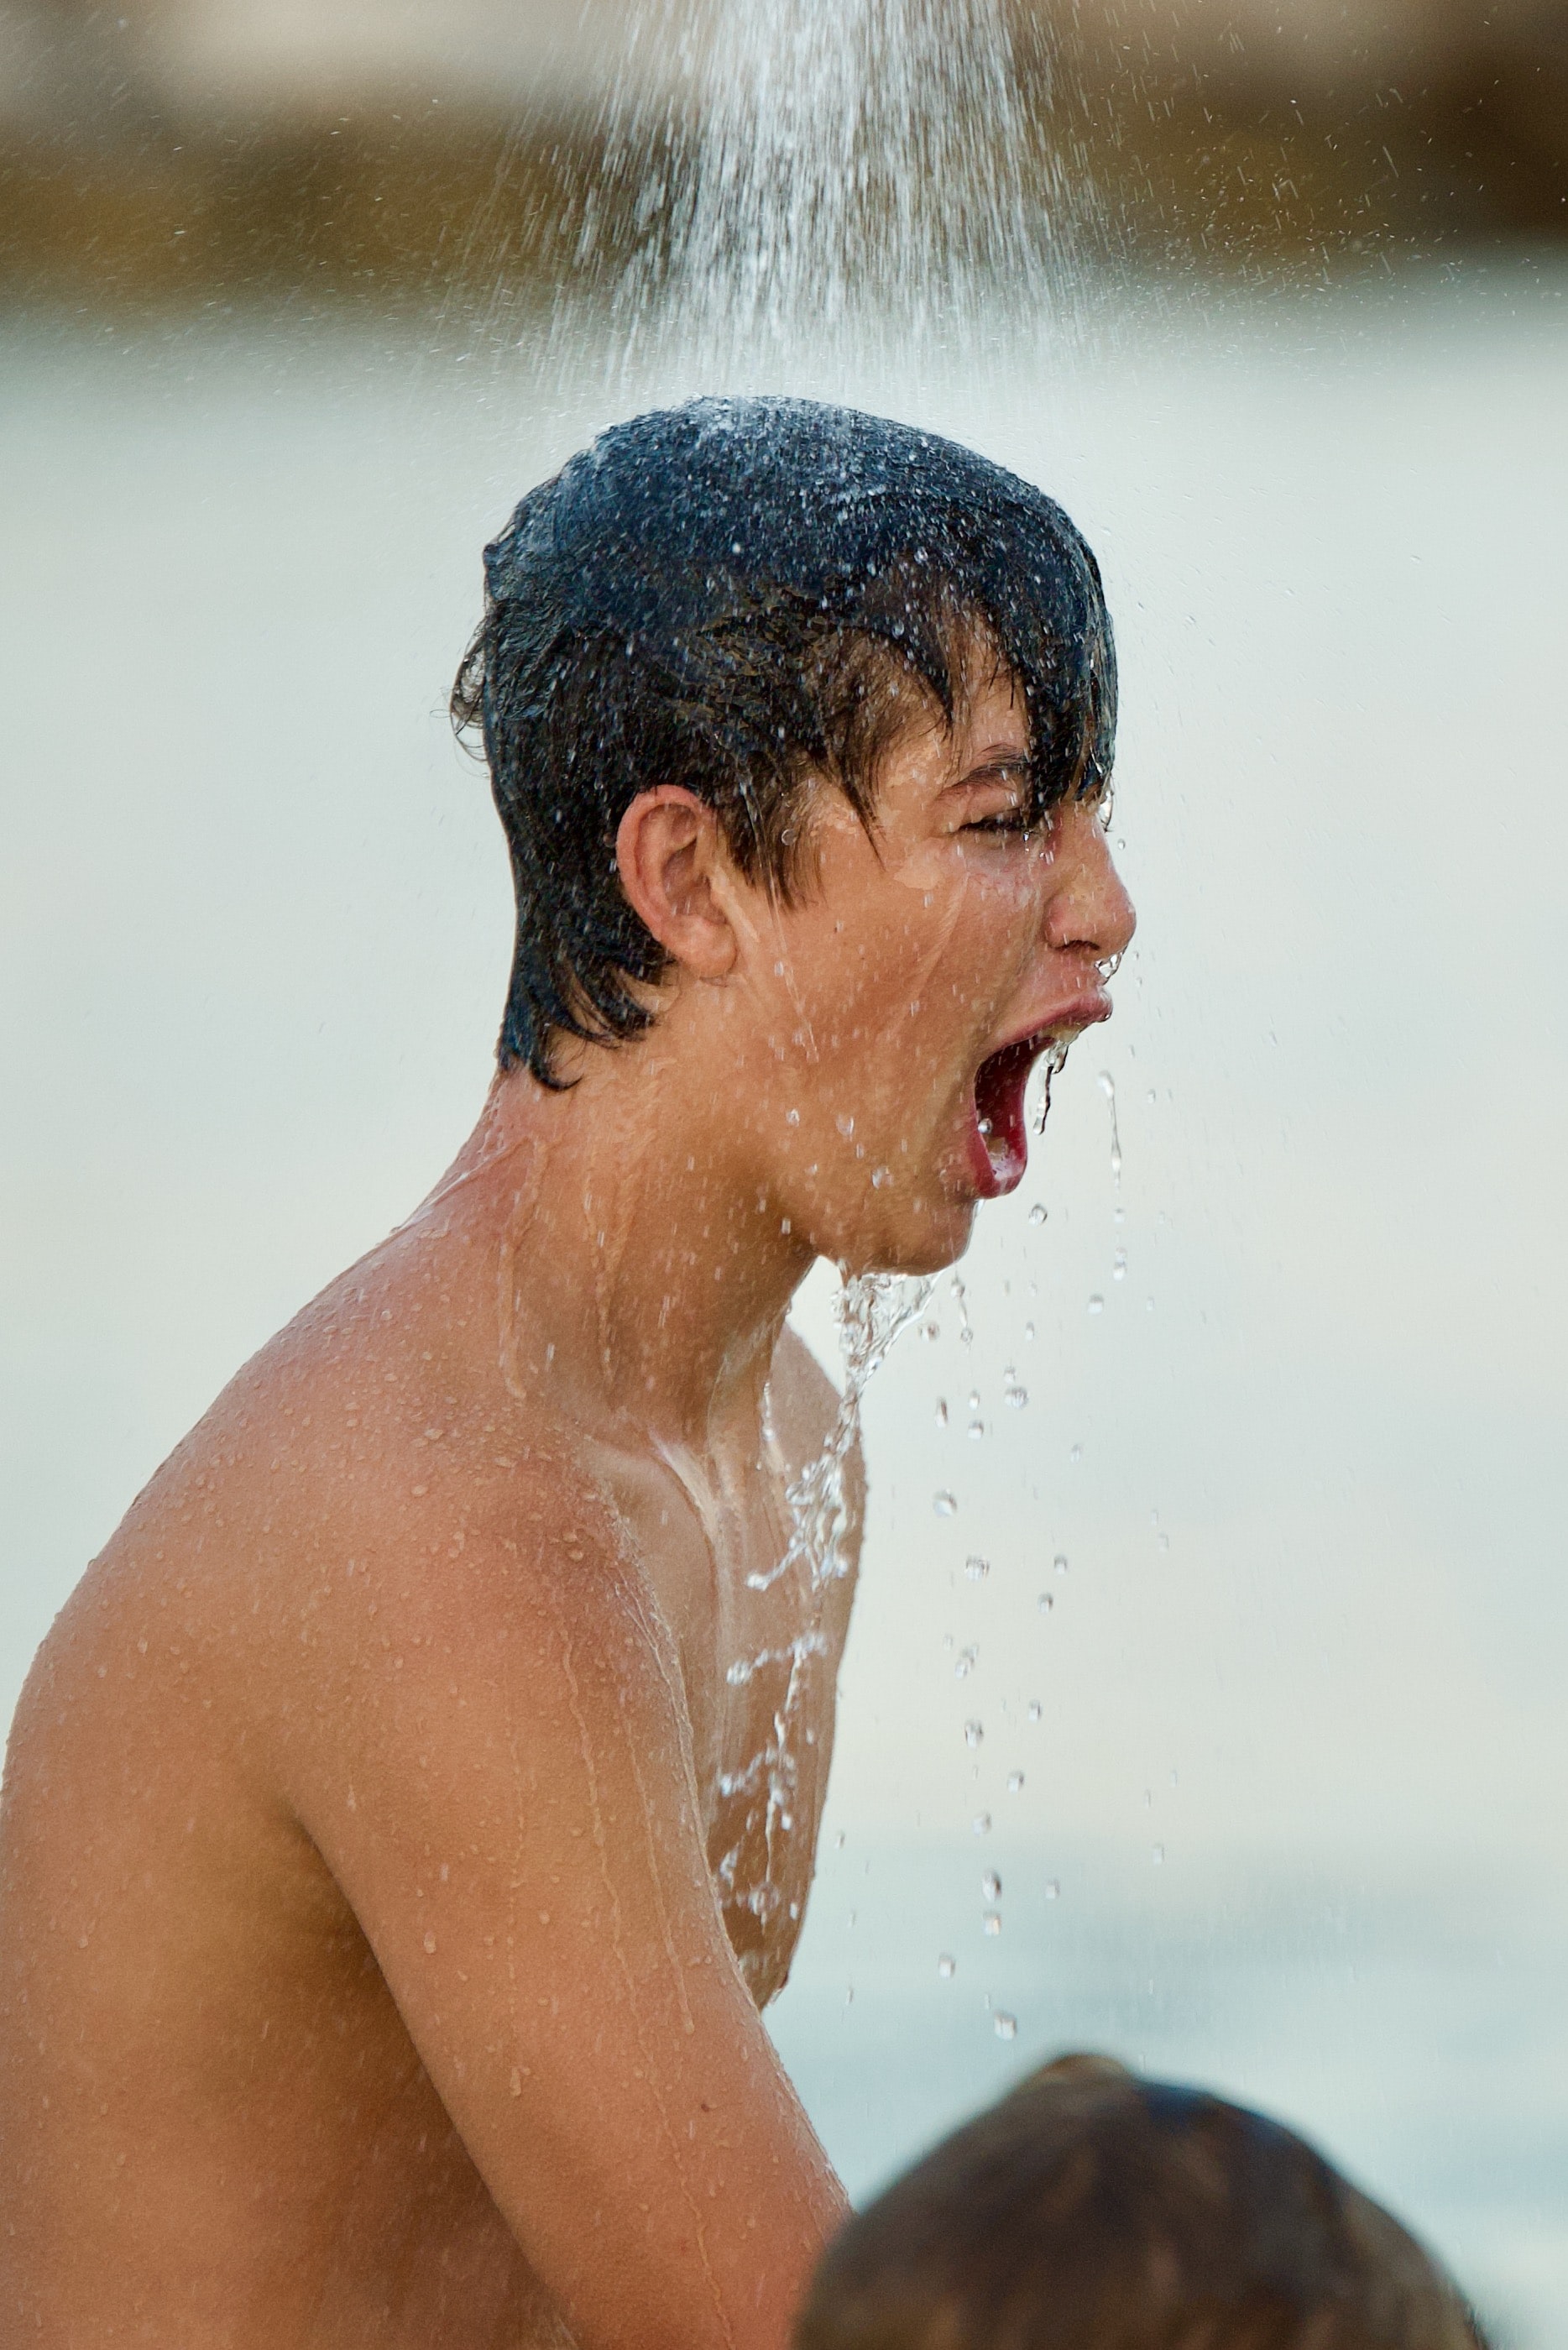 The Benefits Of Cold Showers For Health - Why You Should Consider Taking Cold Showers